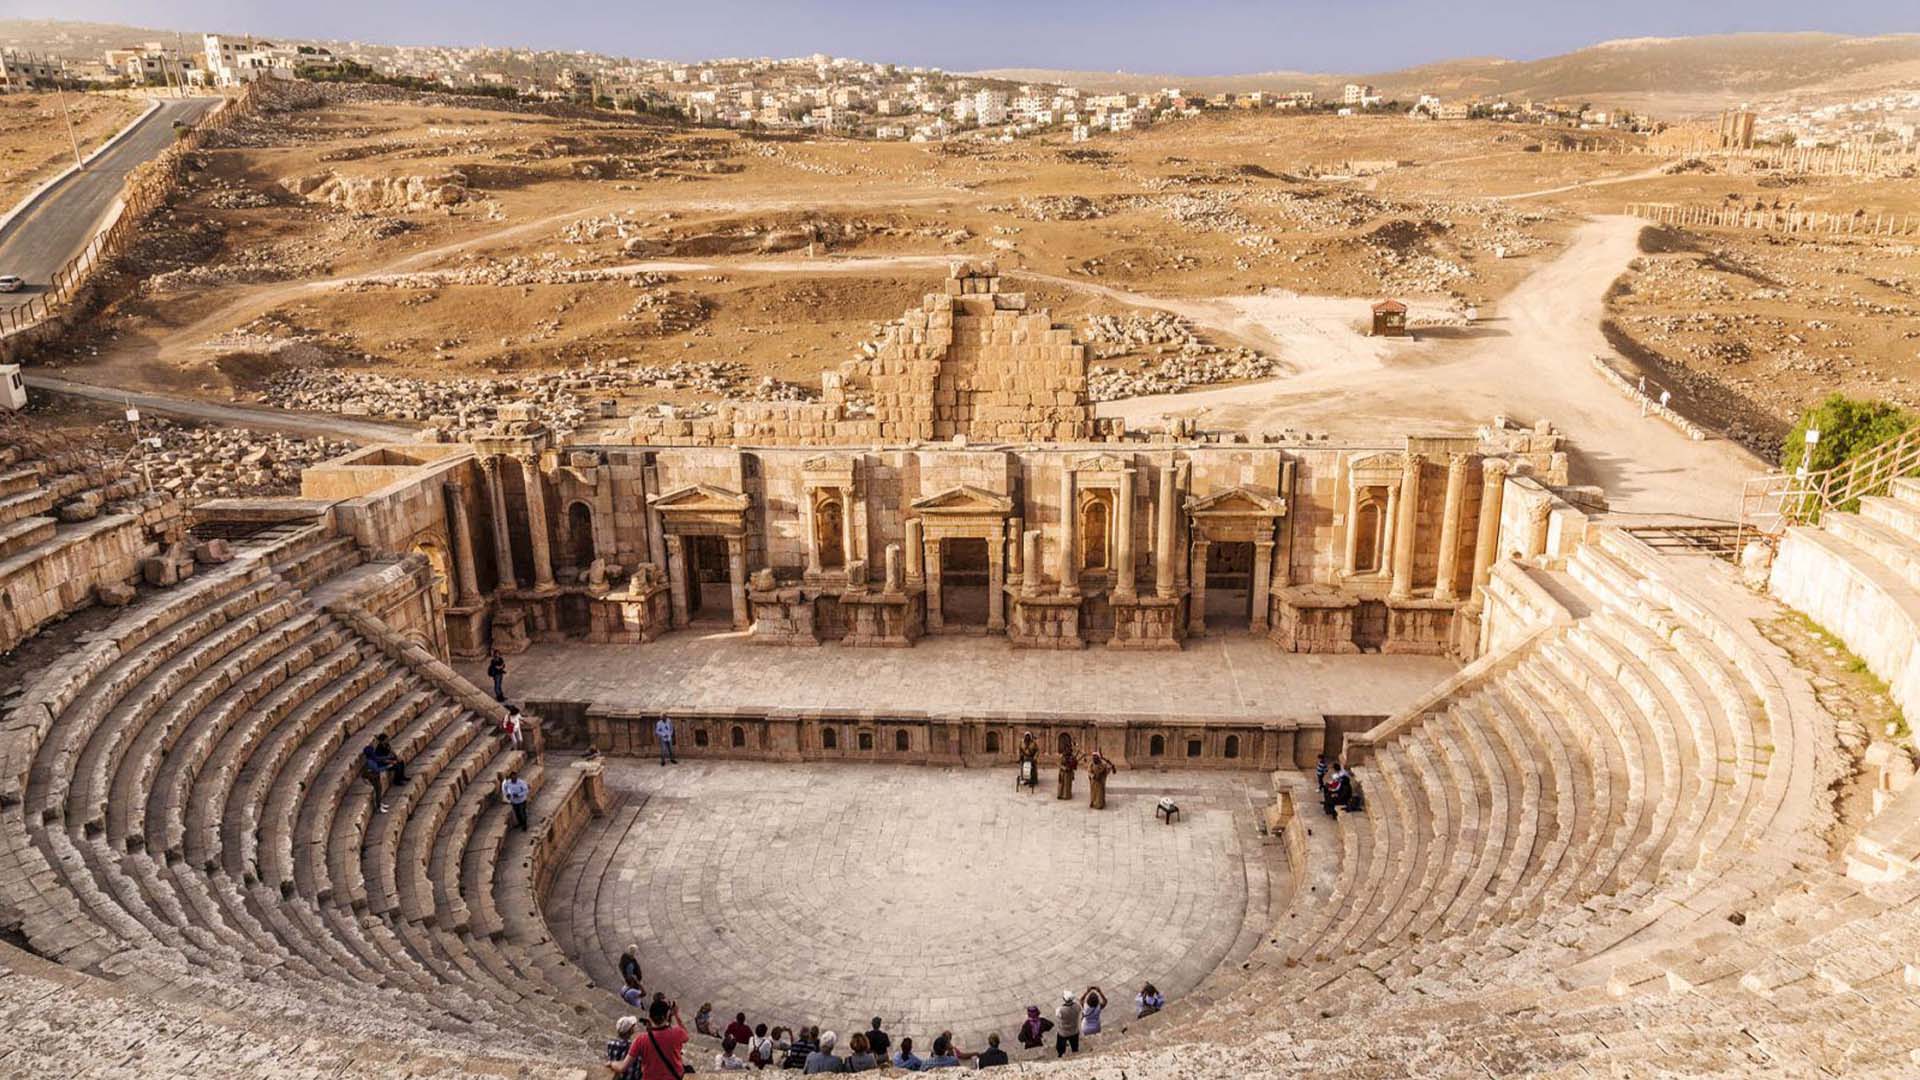 A panoramic photograph immortalizes the captivating Theater of Jerash, where visitors immerse themselves in the spellbinding performance of traditional musicians.